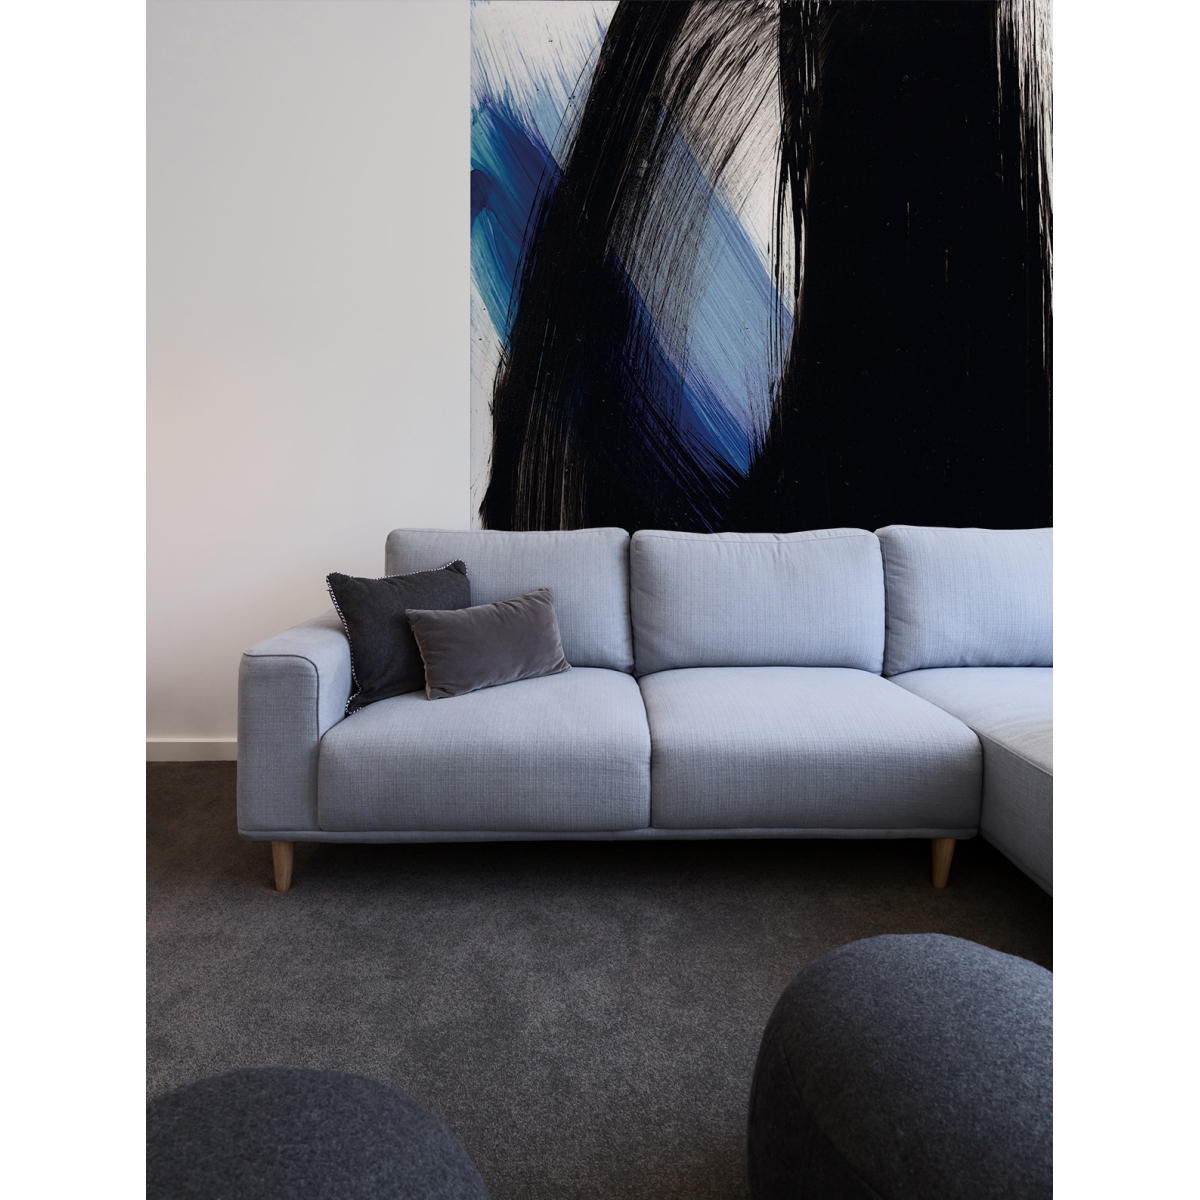 Blueblack wallpapers by Nadia Barbotin- Collection Acte-Deco